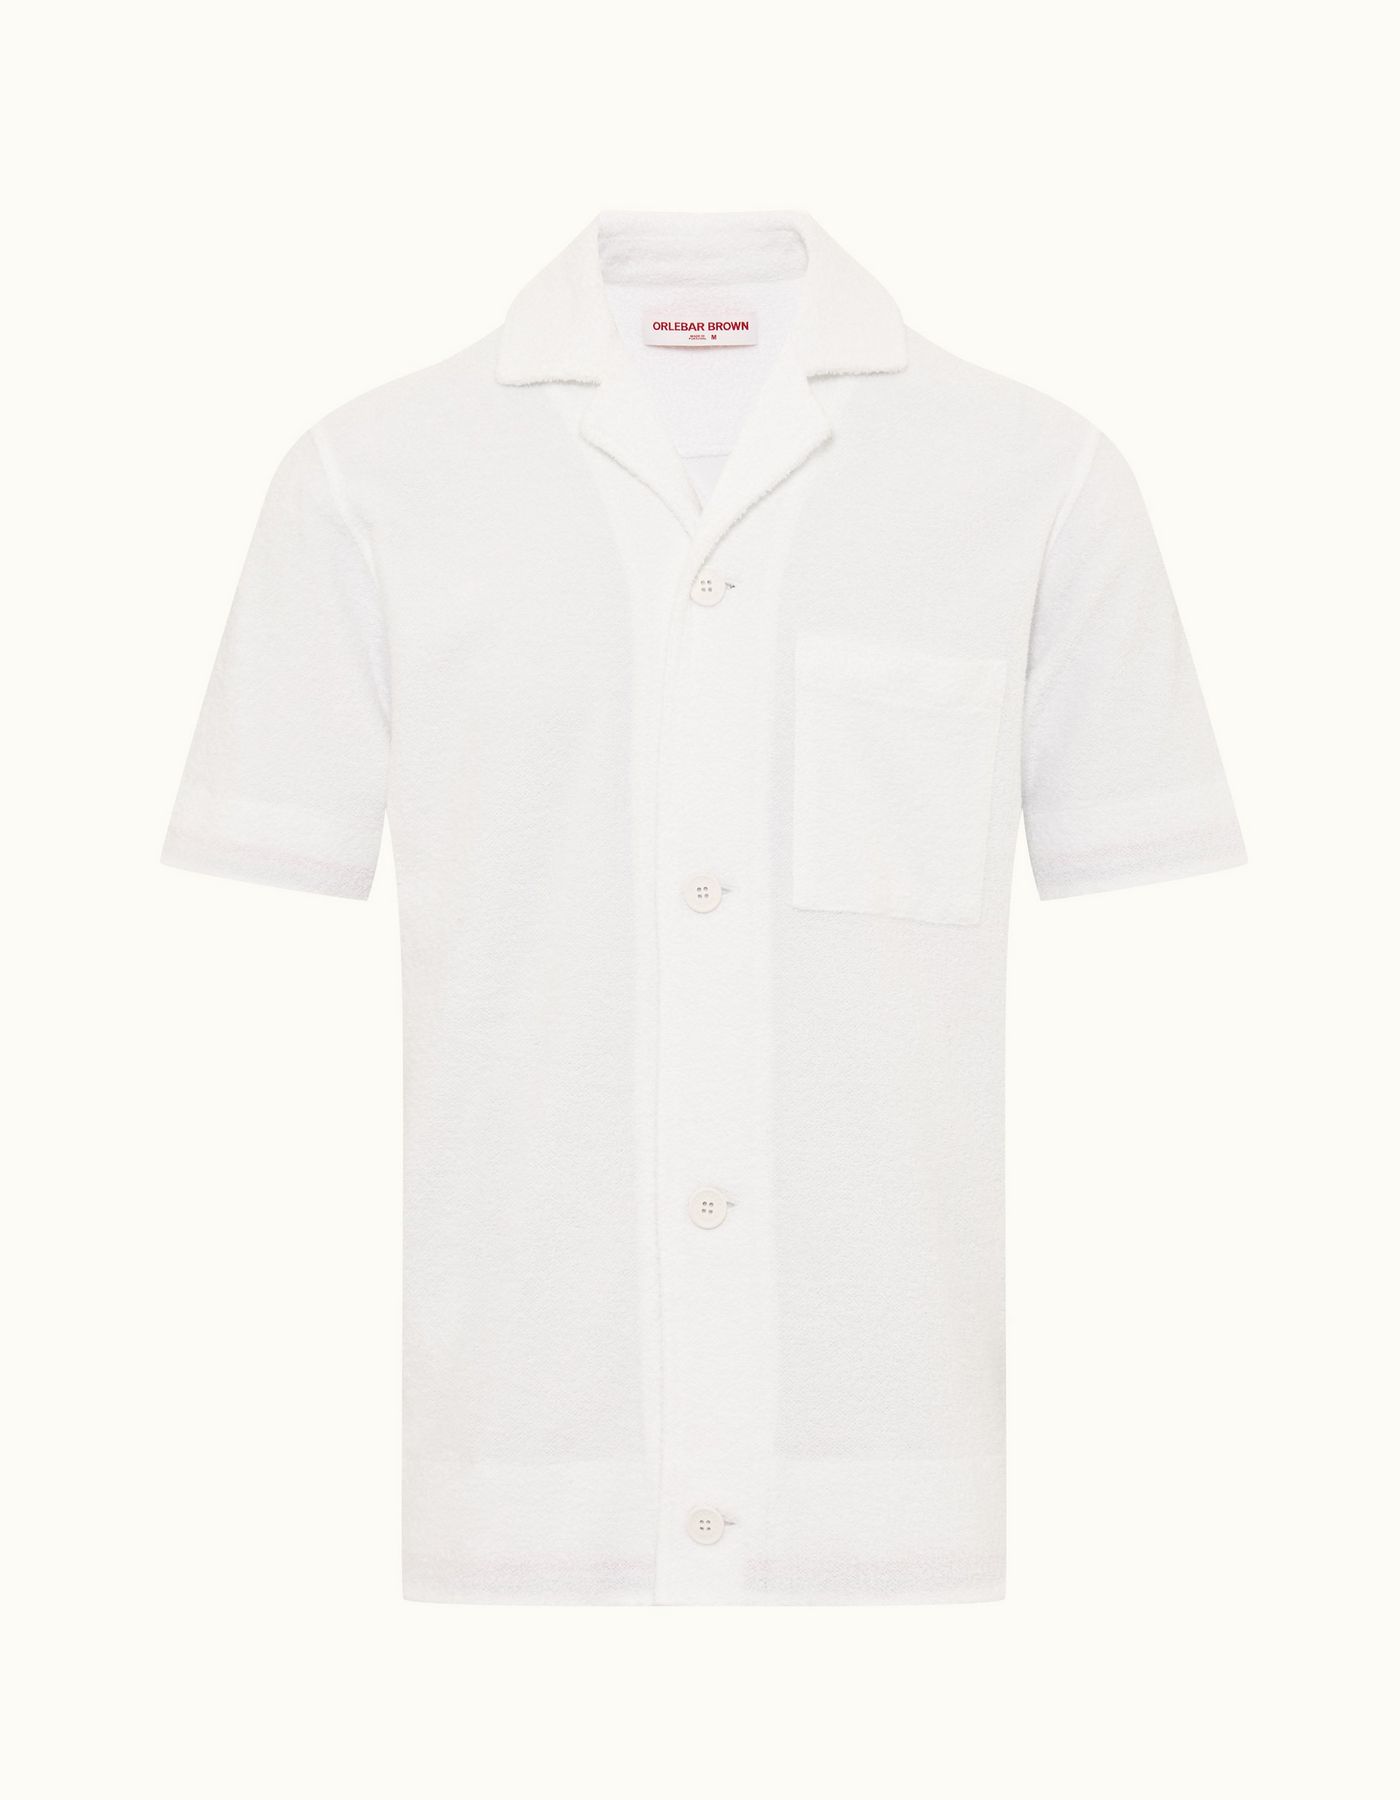 Lazar Towelling - Mens White Capri Collar Double-Faced Towelling Shirt